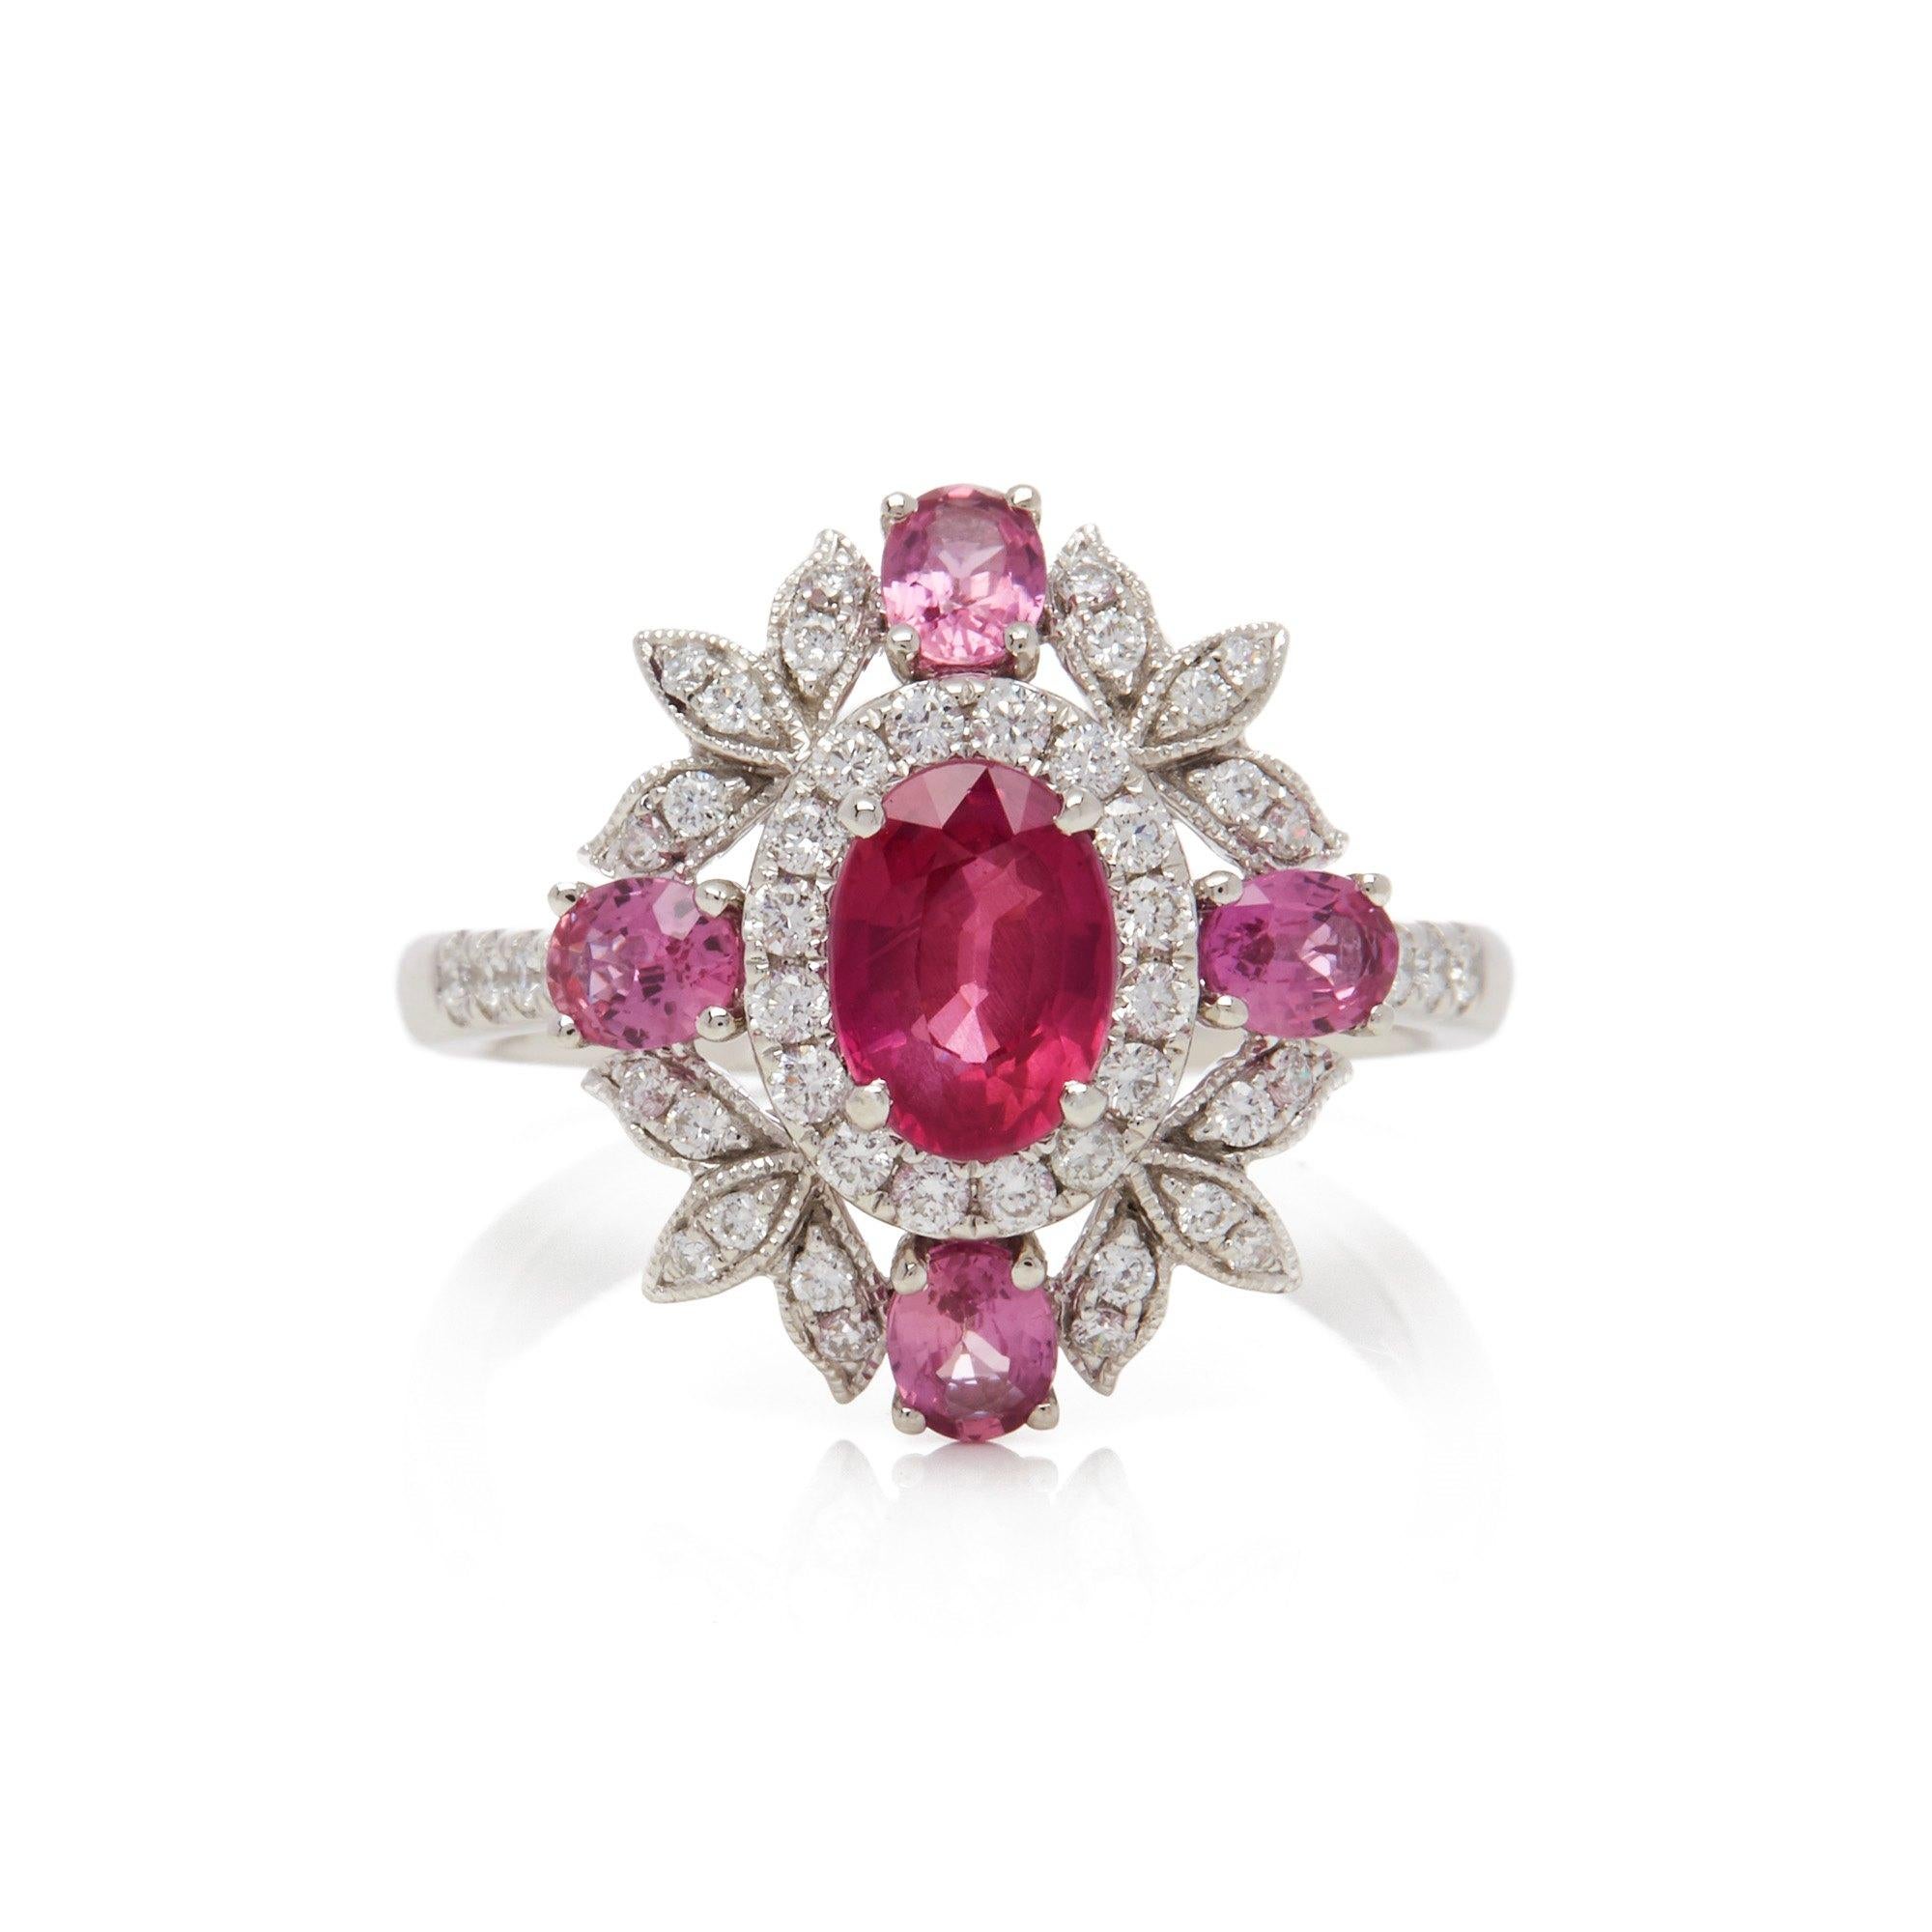 This ring designed by David Jerome is from his private collection and features one oval cut Ruby sourced in Mozambique totalling 1.19cts. Set with a mix of round brilliant cut Diamonds and pink Sapphires totalling 1.60cts combined. Mounted in